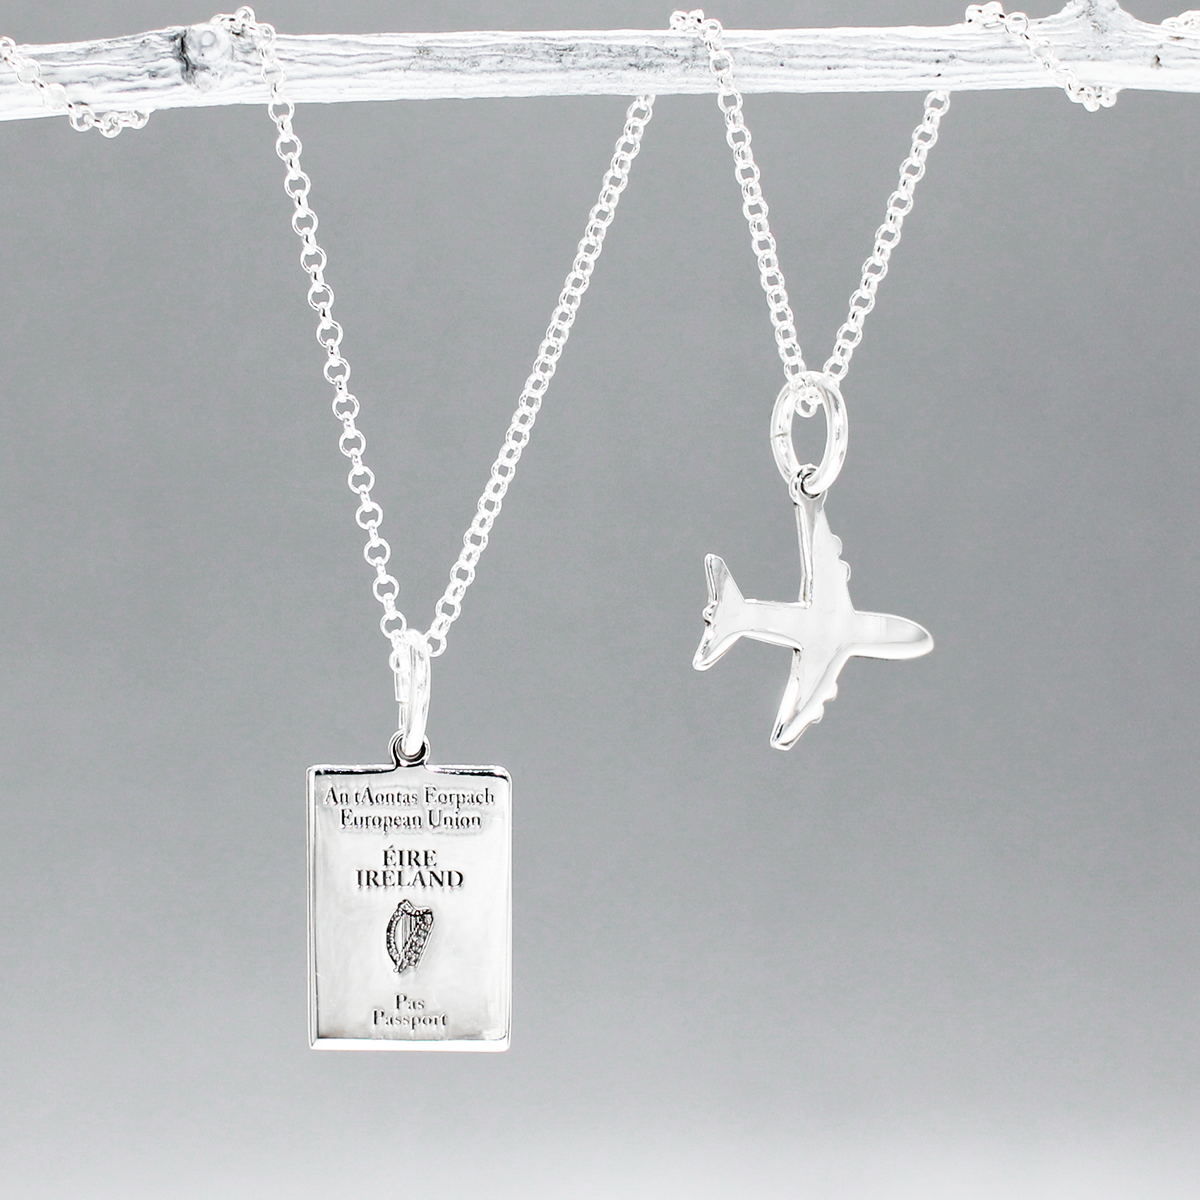 Irish Passport Replica Mini Silver Pendant with Mini Airplane Charm Pendant by Croí Kinsale Jewellery.  The passport measures 10 millimeters wide by 14 millimeters high, while the airplane charm measures 14 millimeters wide by 14 millimeters high. The bail fits up to a 2.5 mm chain, offering versatility for different chain sizes. Whether you gift it to a wanderer or keep it as a timeless heirloom, this pendant is a symbol of Irish pride and wanderlust. Kinsale gift